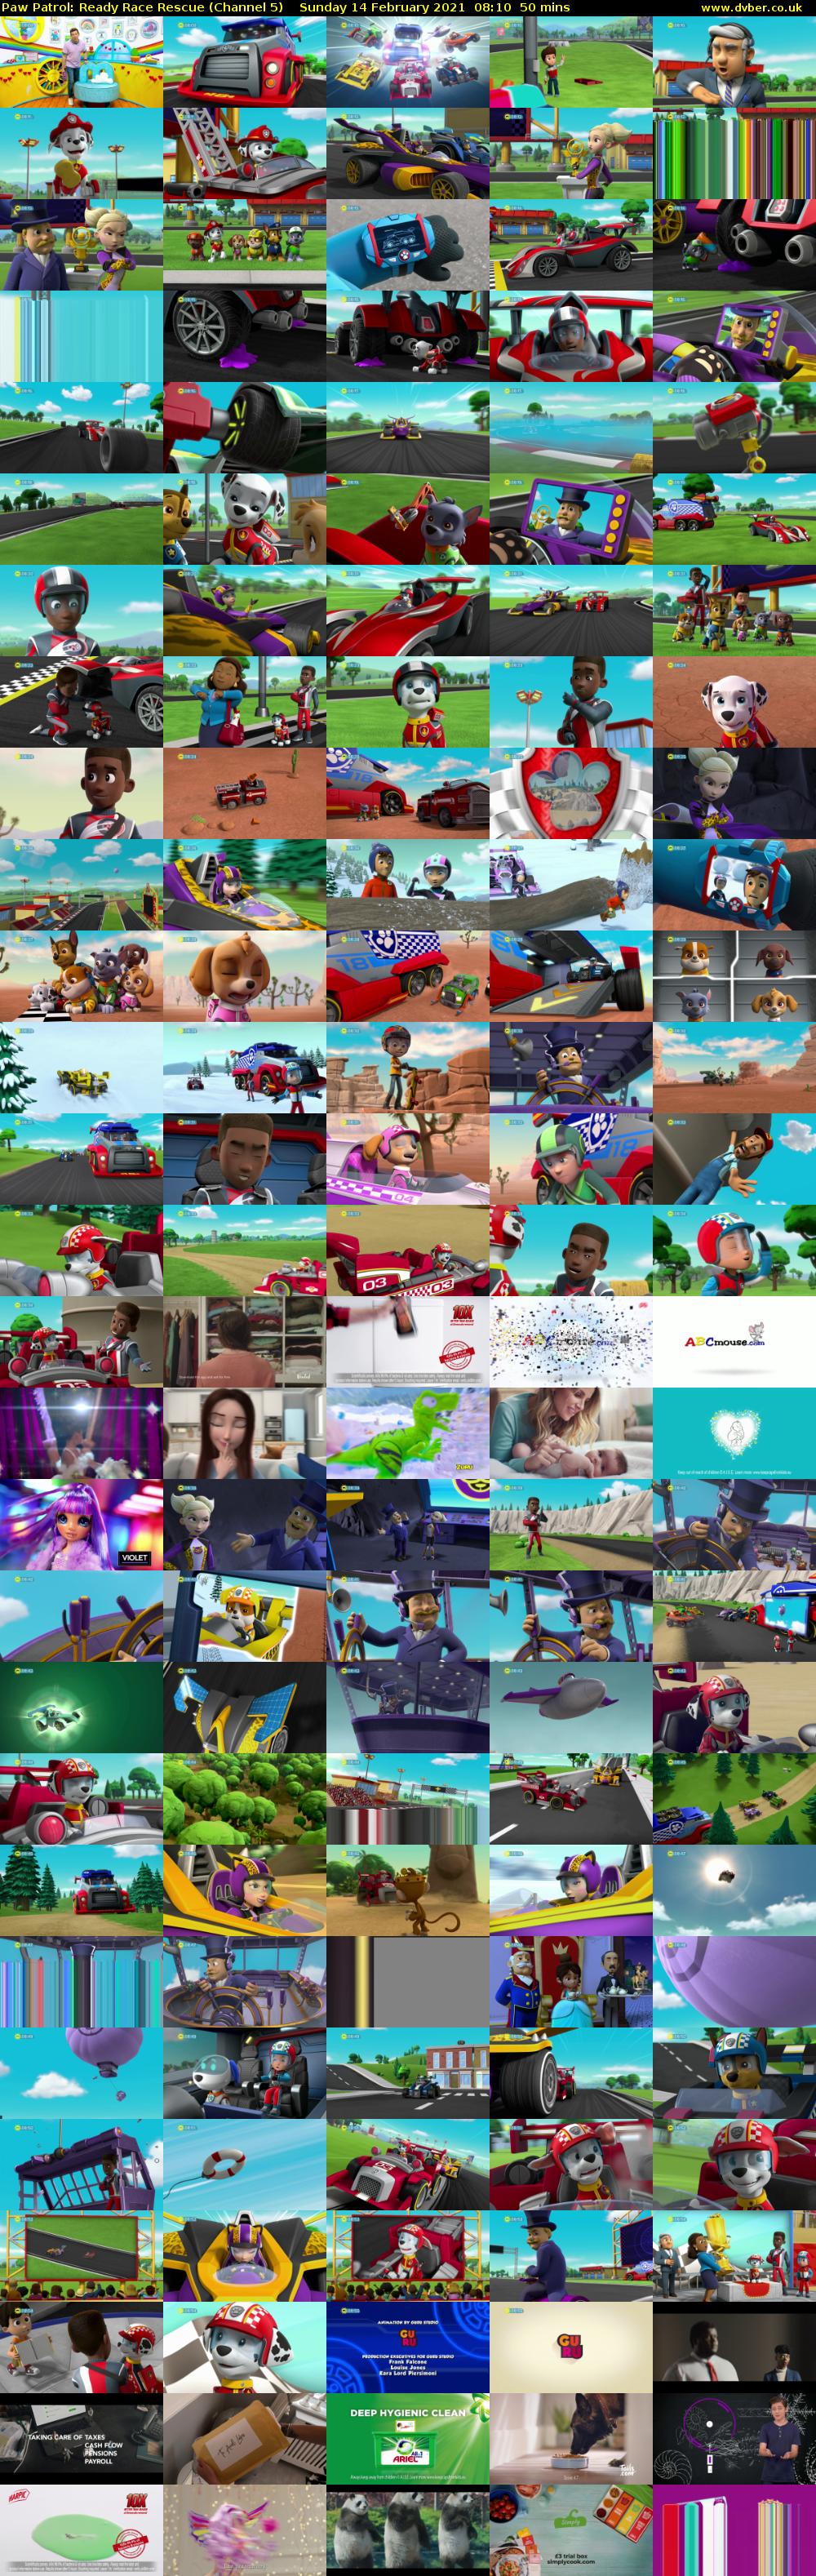 Paw Patrol: Ready Race Rescue (Channel 5) Sunday 14 February 2021 08:10 - 09:00